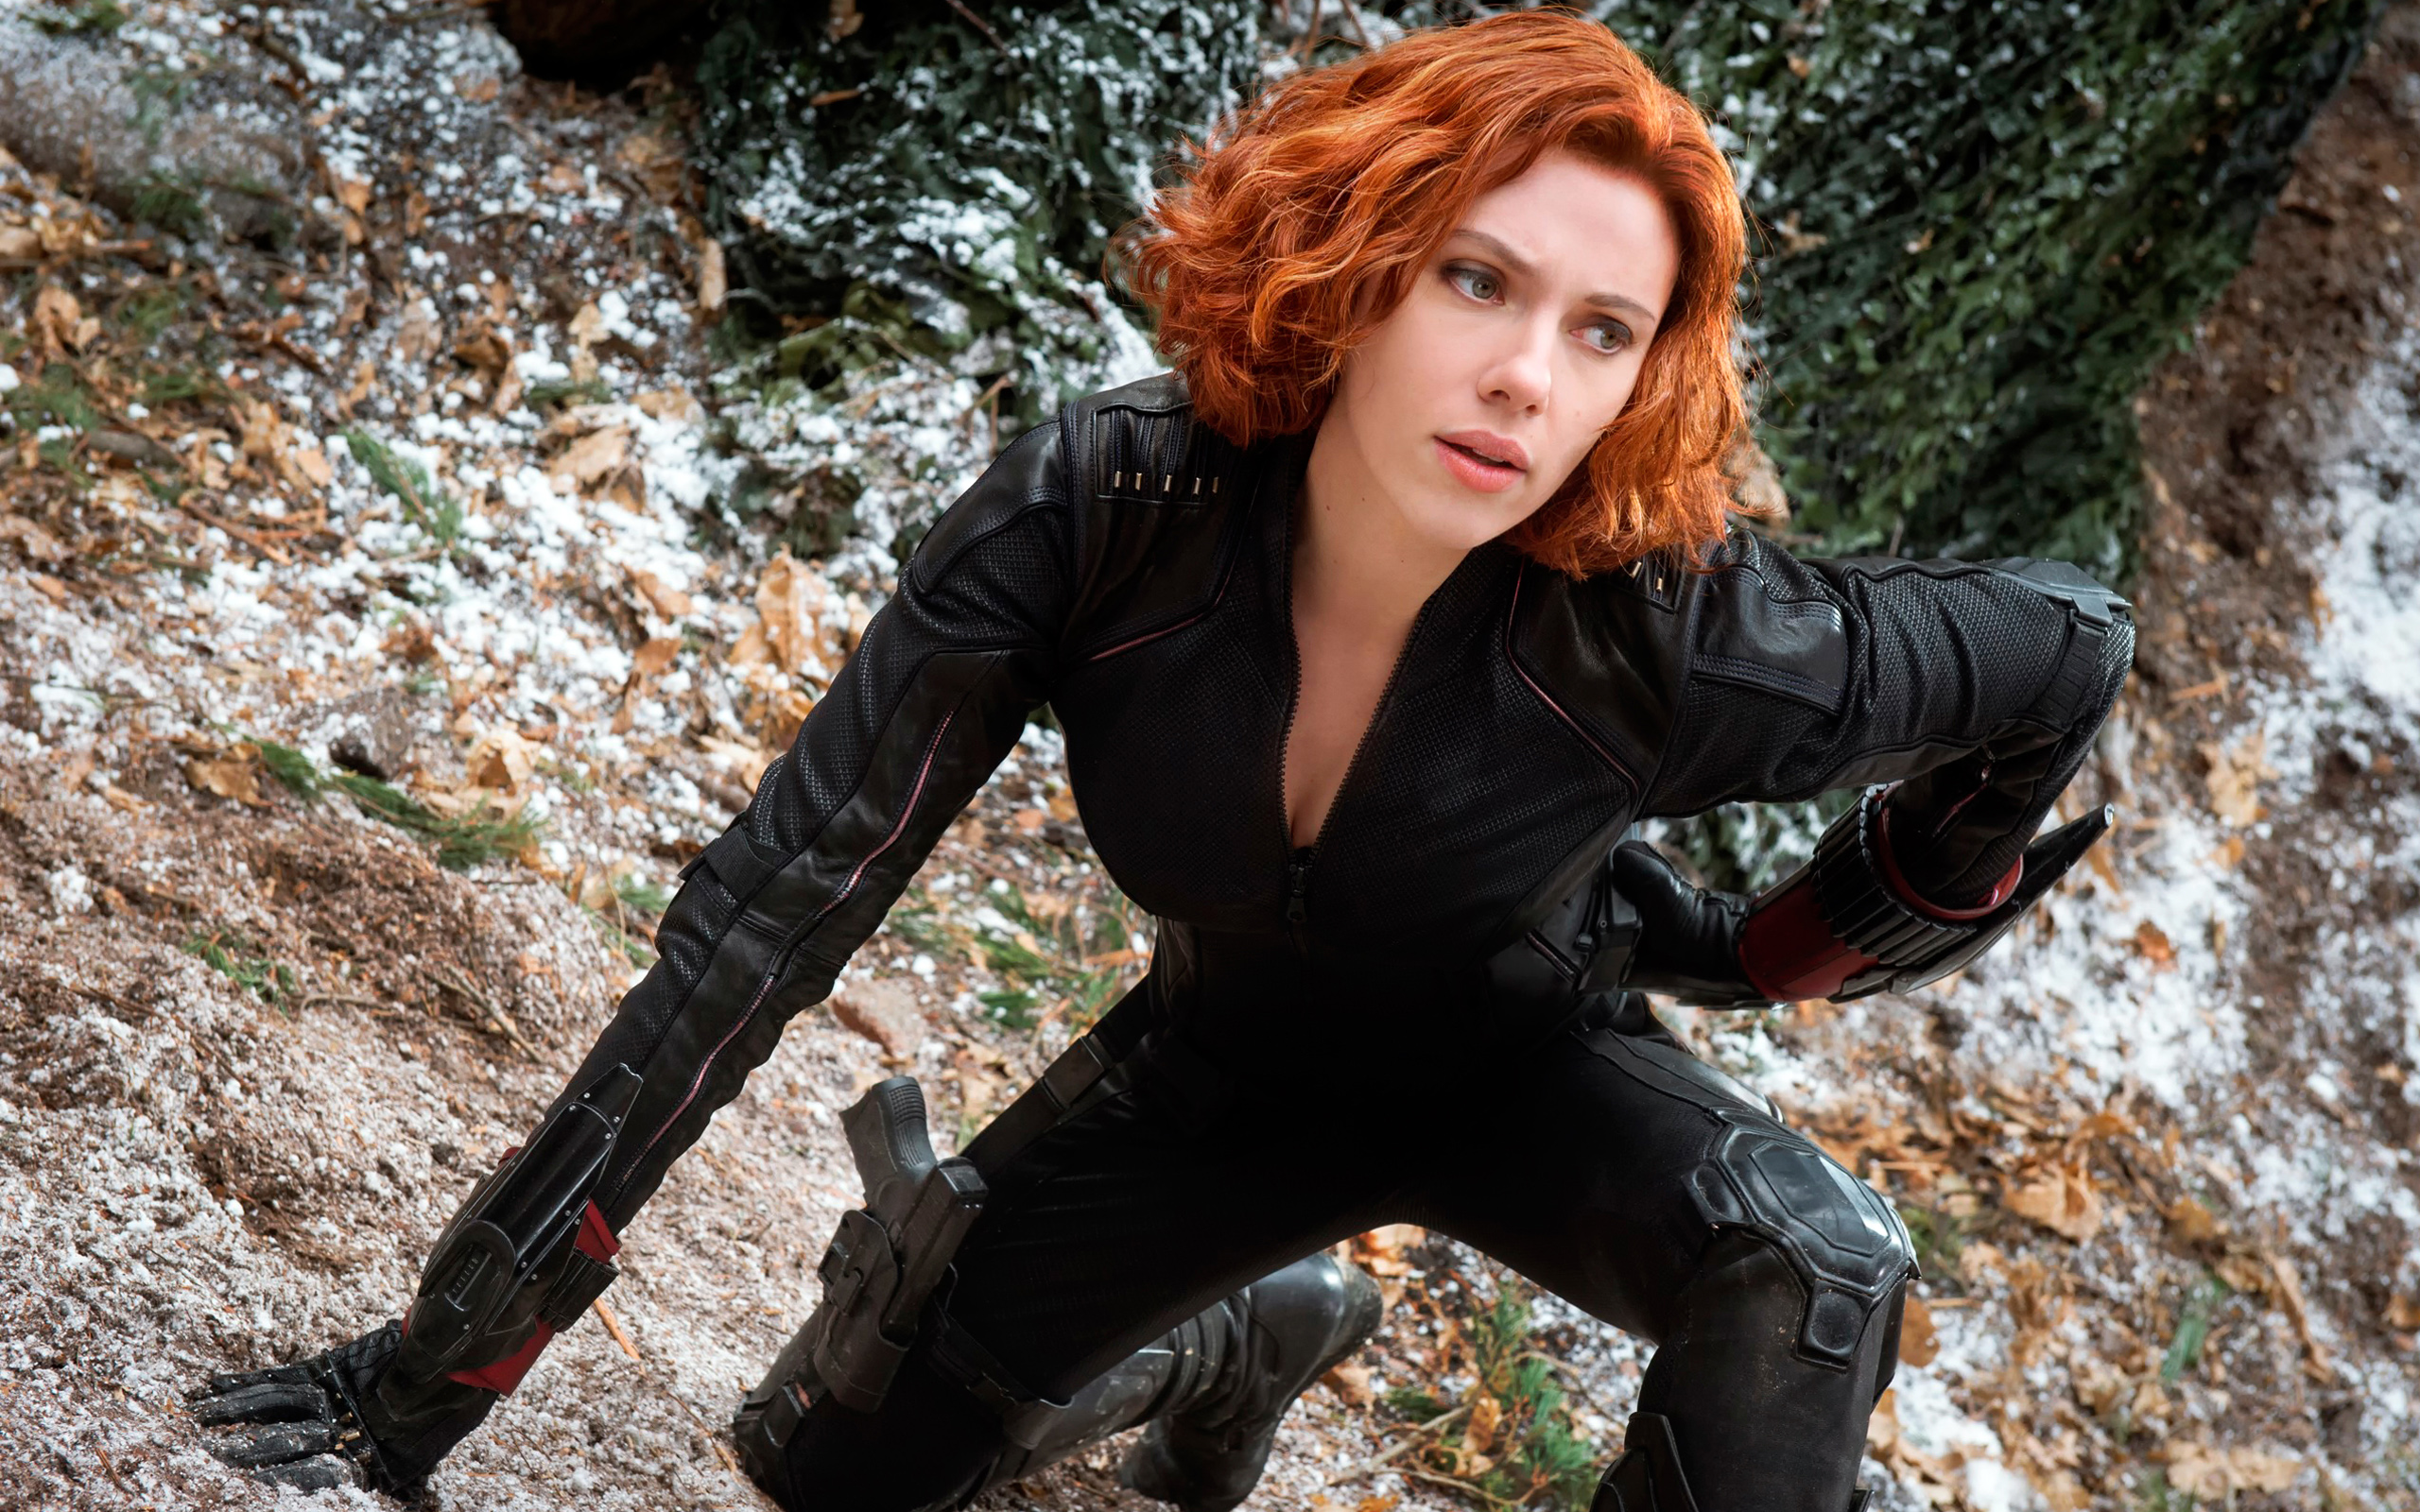 Black Widow in The Avengers 2 Wallpapers HD Wallpapers